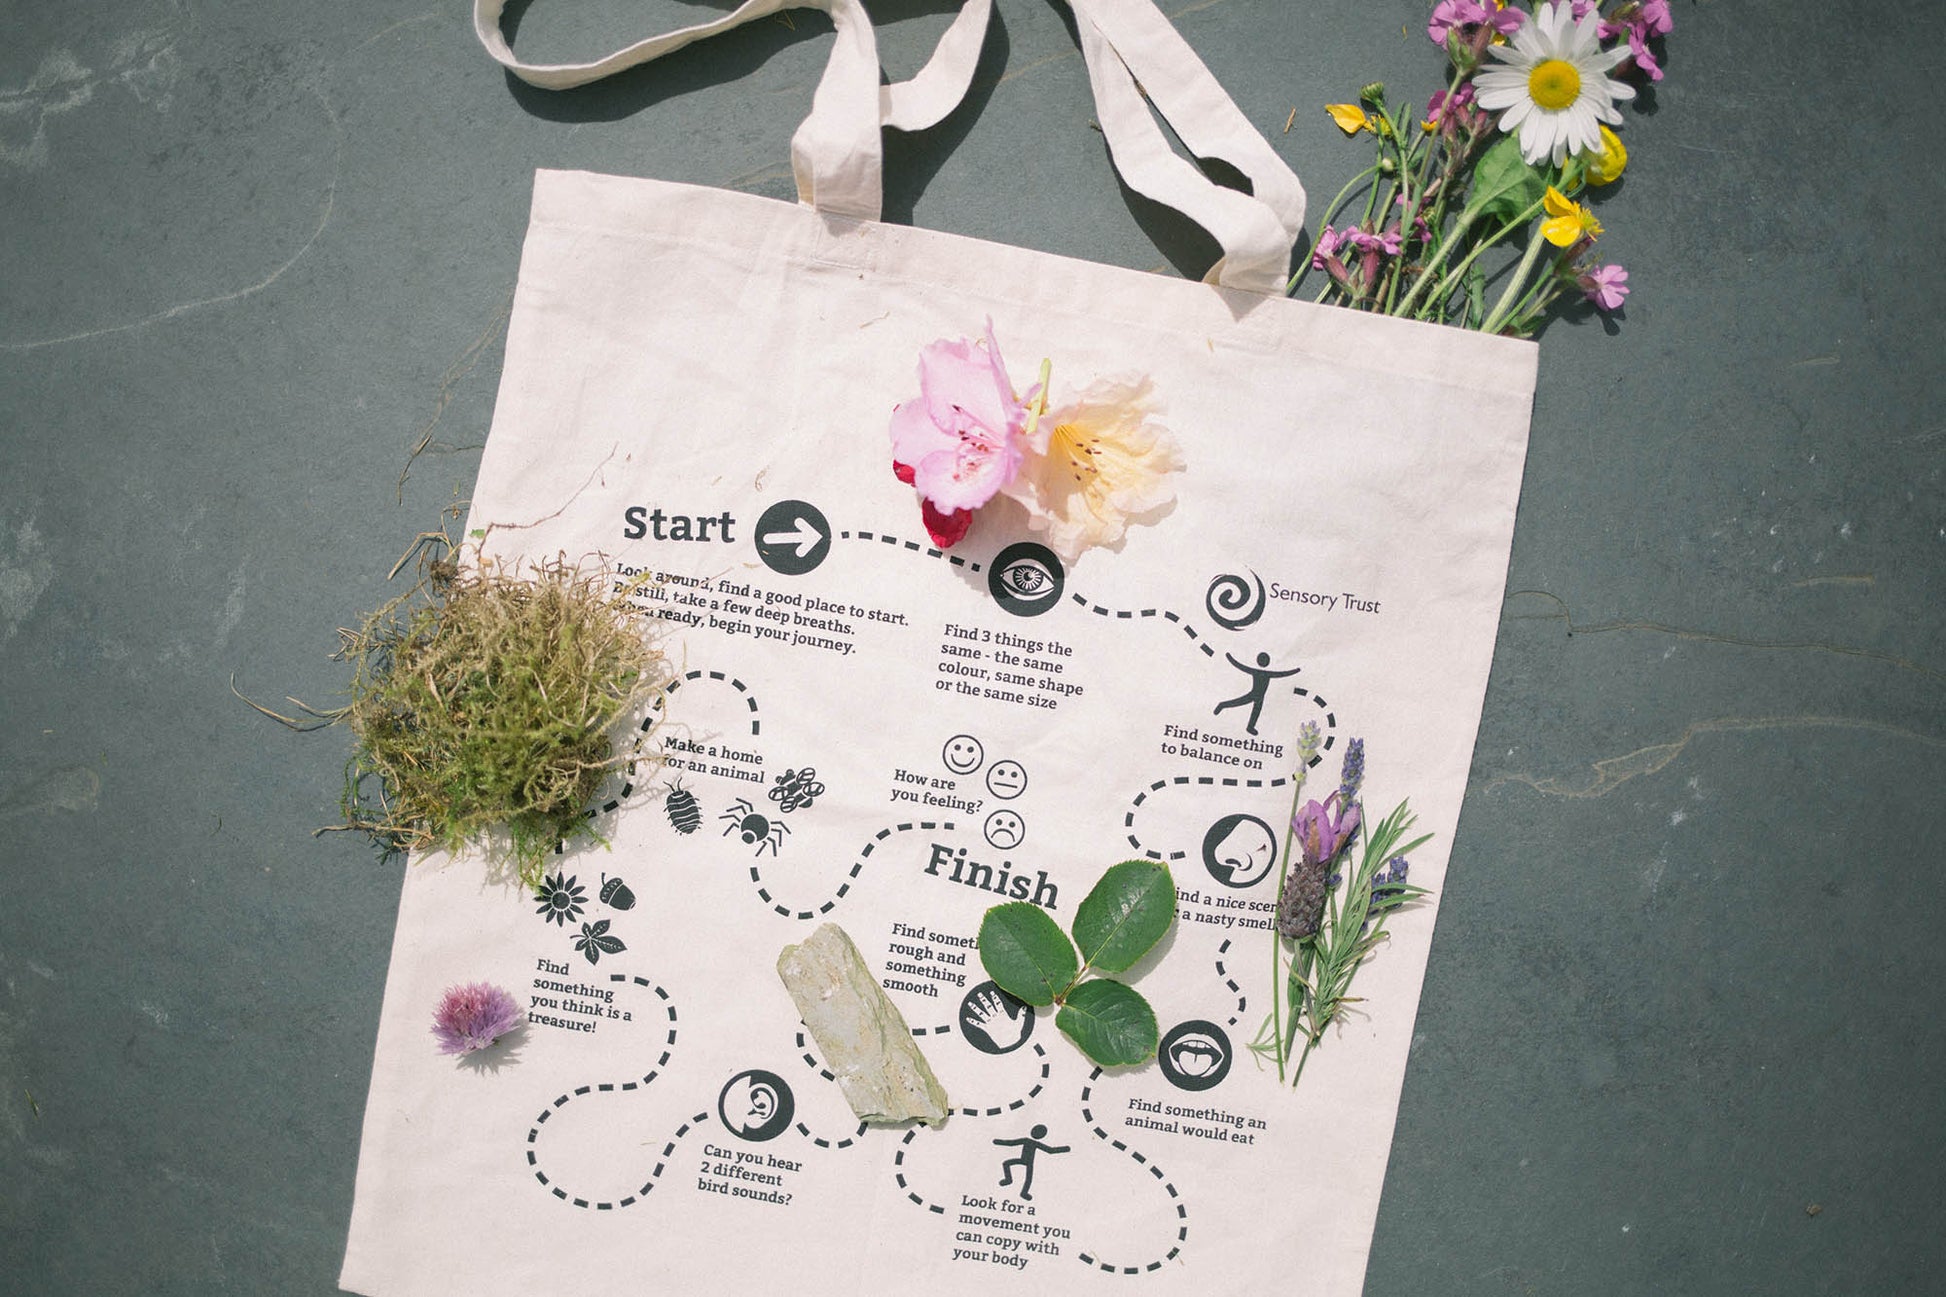 Nature Journey Bag by Sensory Trust with items from nature laid on top